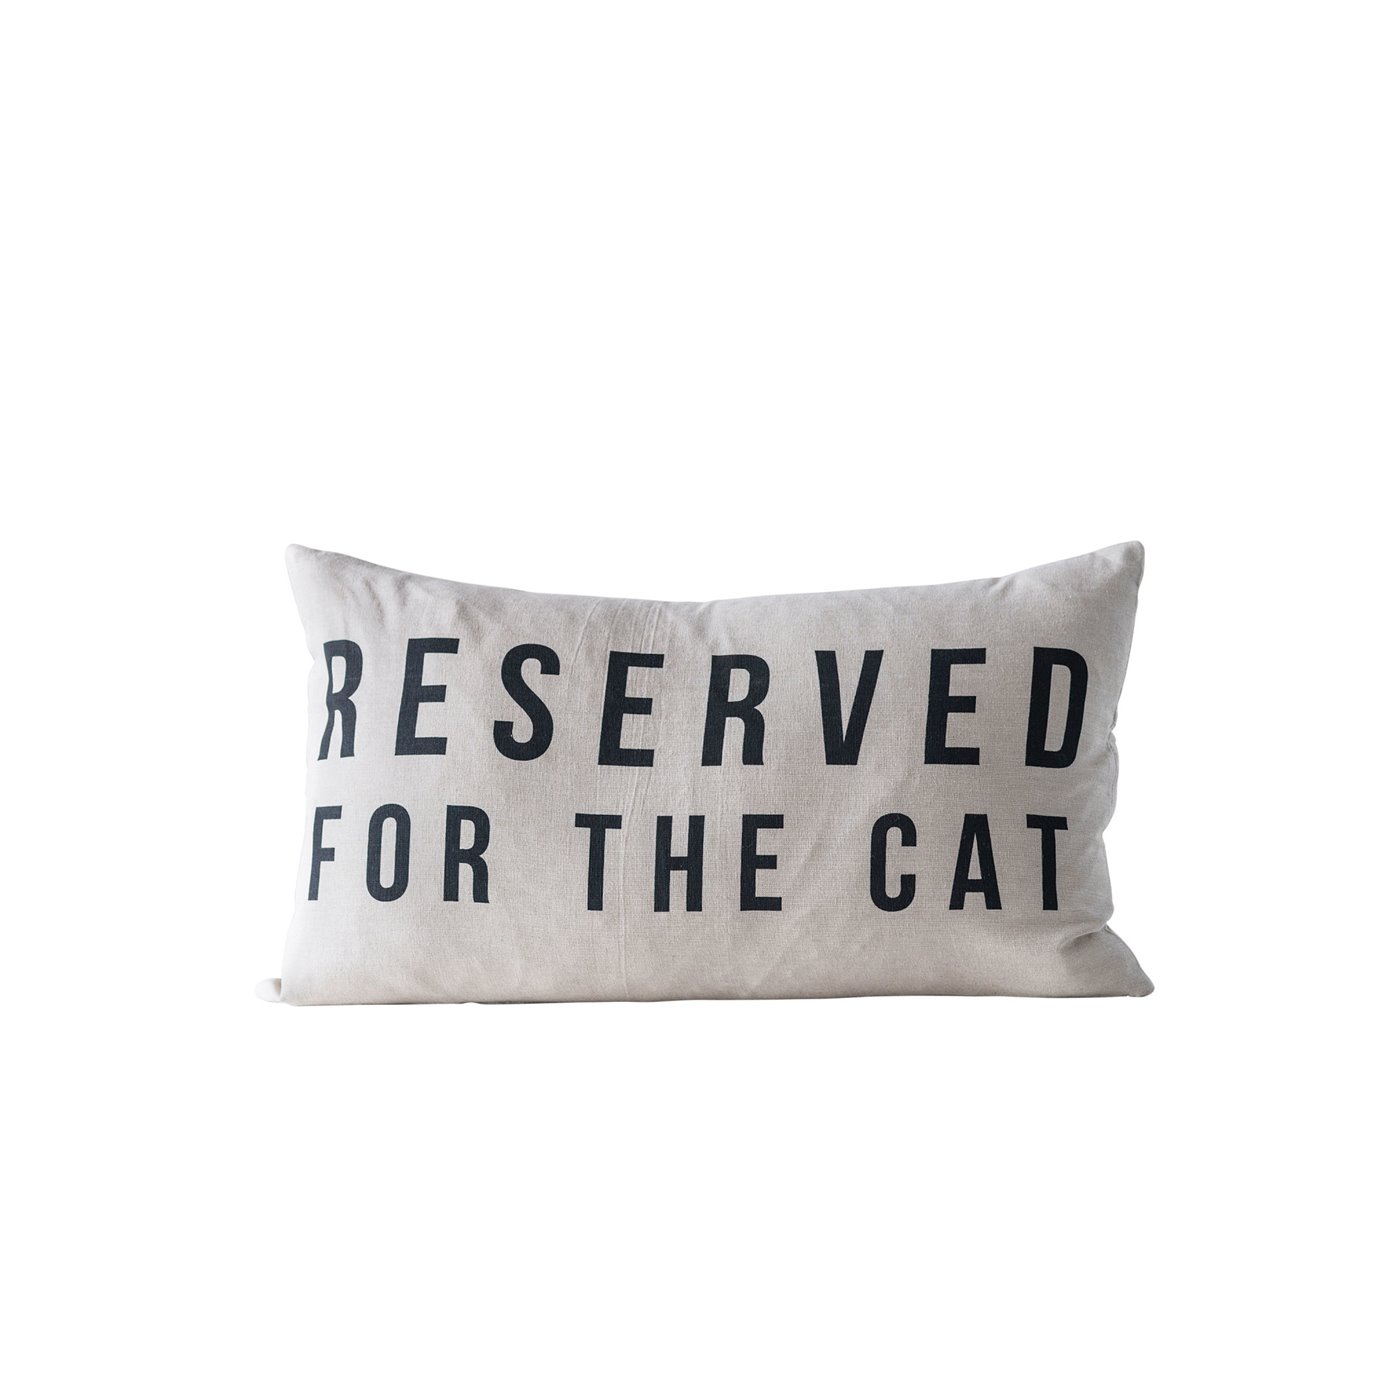 "Reserved for the Cat" Cotton Pillow